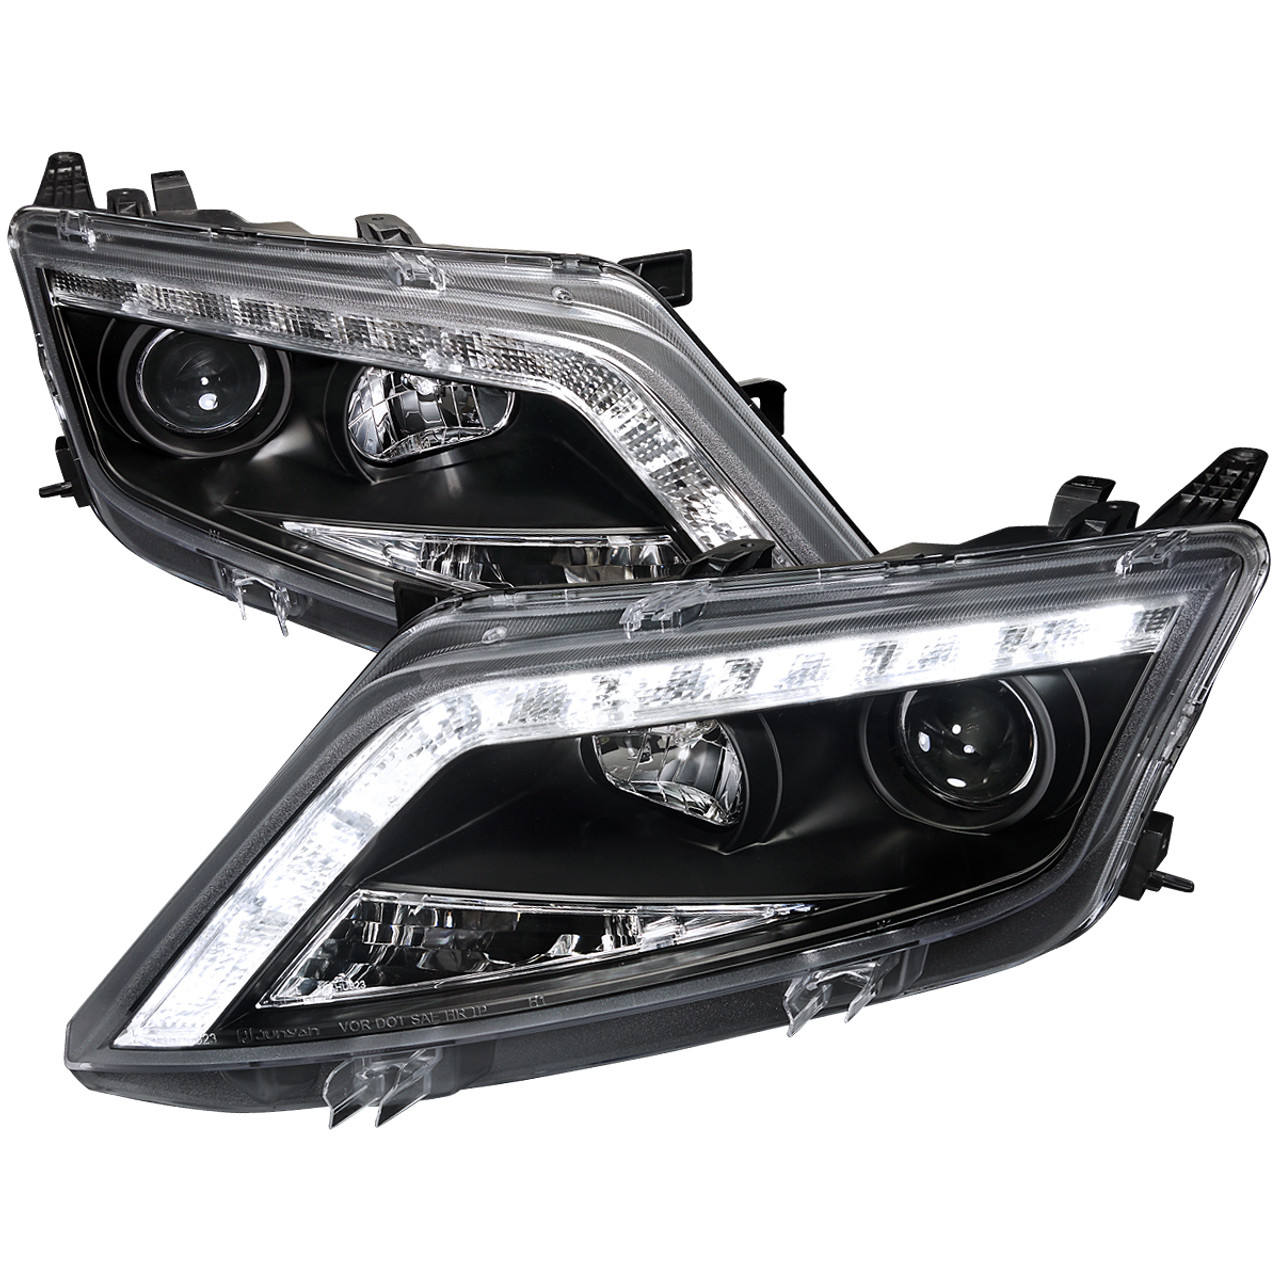 2010-2012 Ford Fusion Projector Headlights w/ LED Light Strip